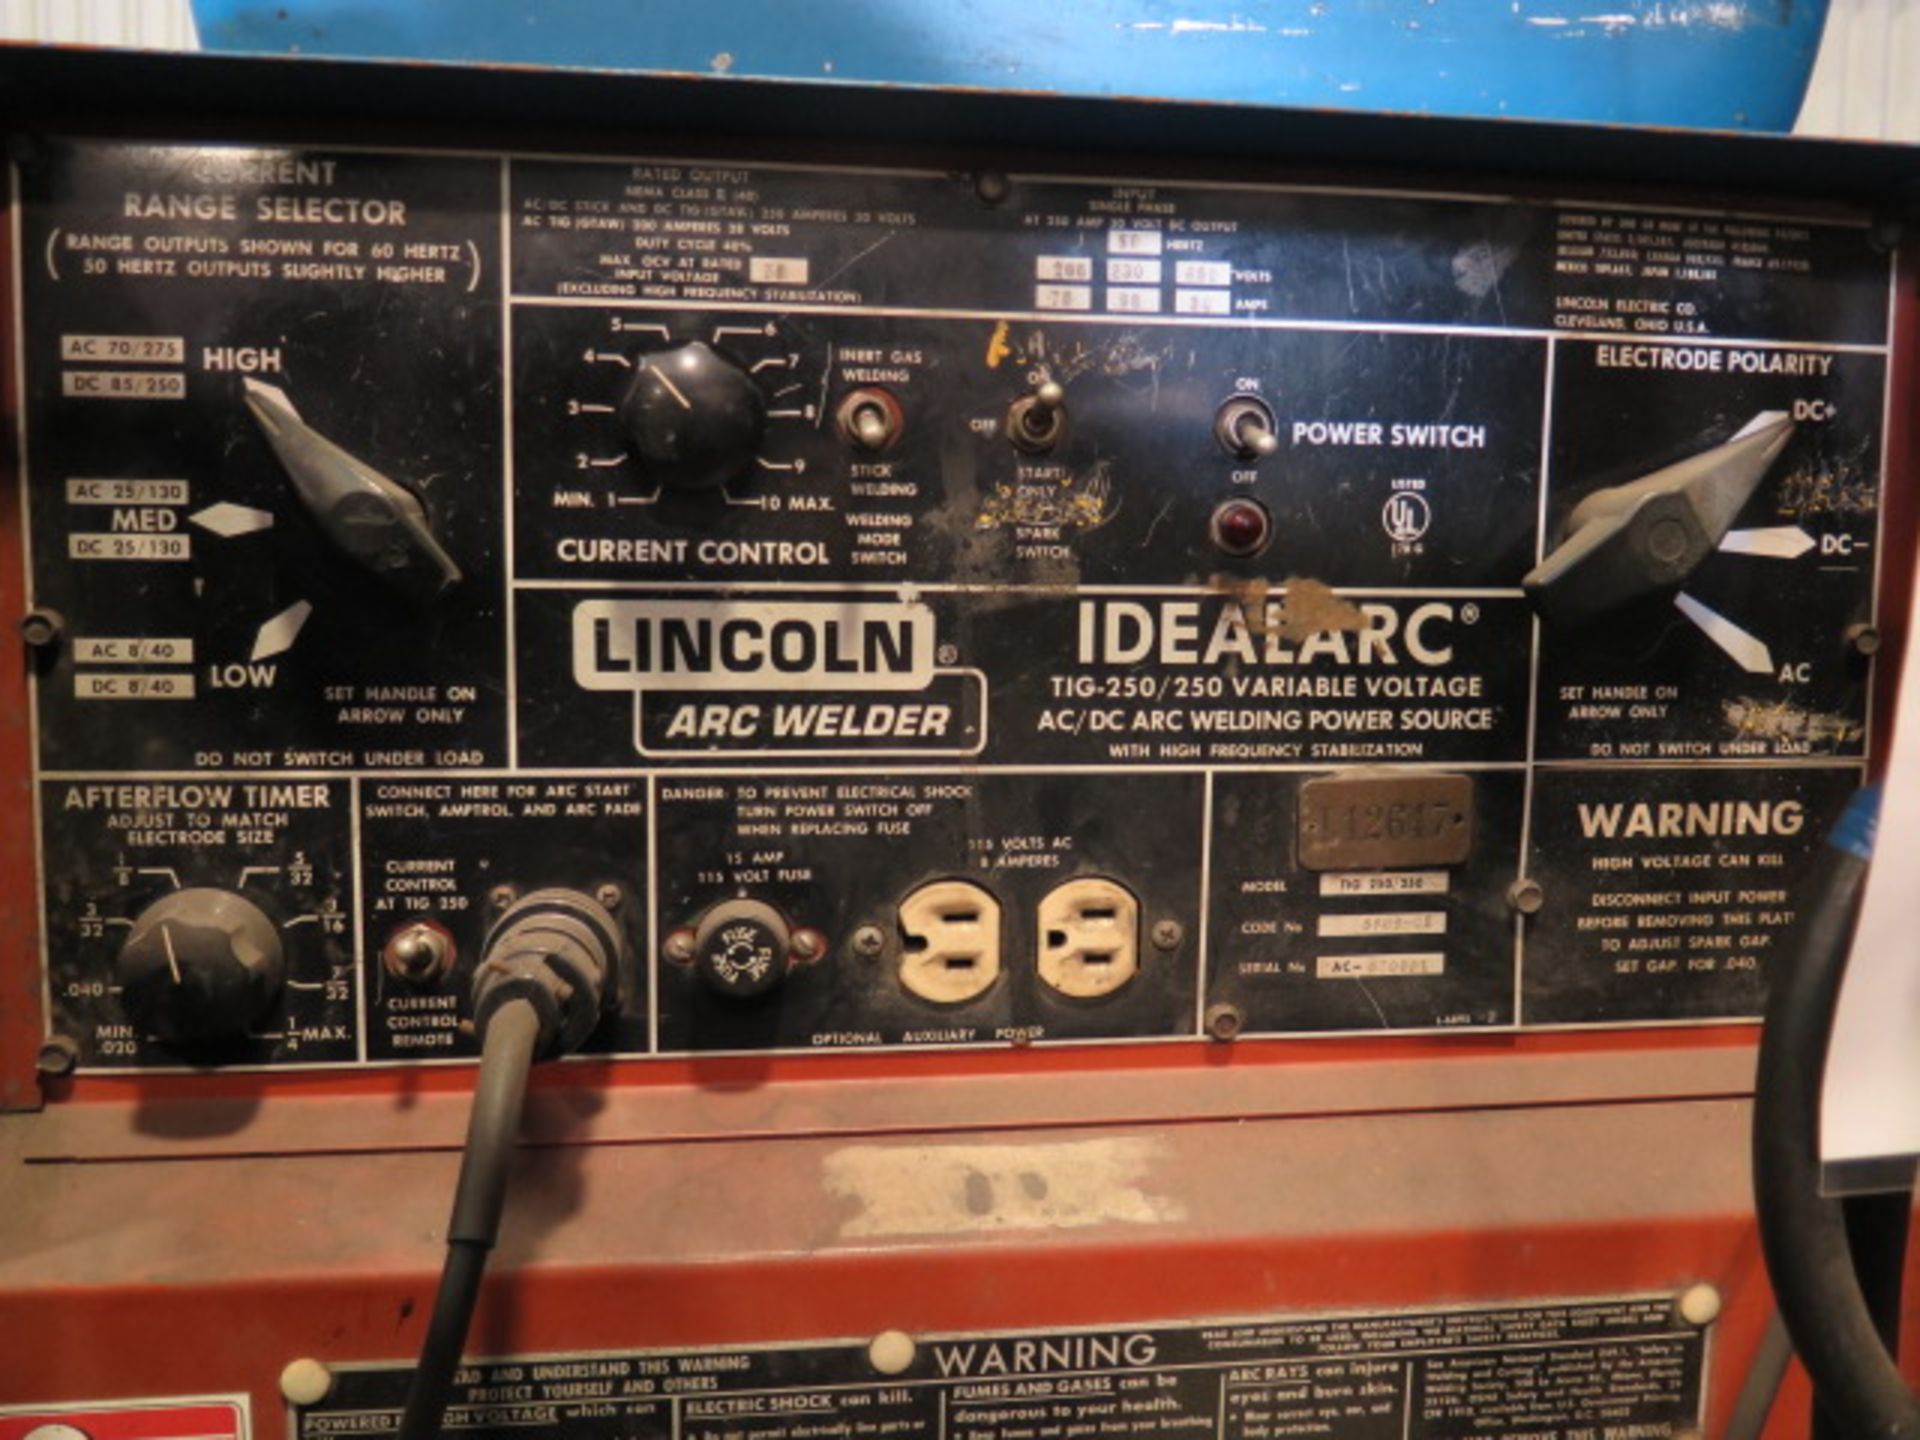 Lincoln Idealarc TIG 250/250 Arc Welding Power Source w/ Bernard Cooler (SOLD AS-IS - NO WARRANTY) - Image 3 of 10